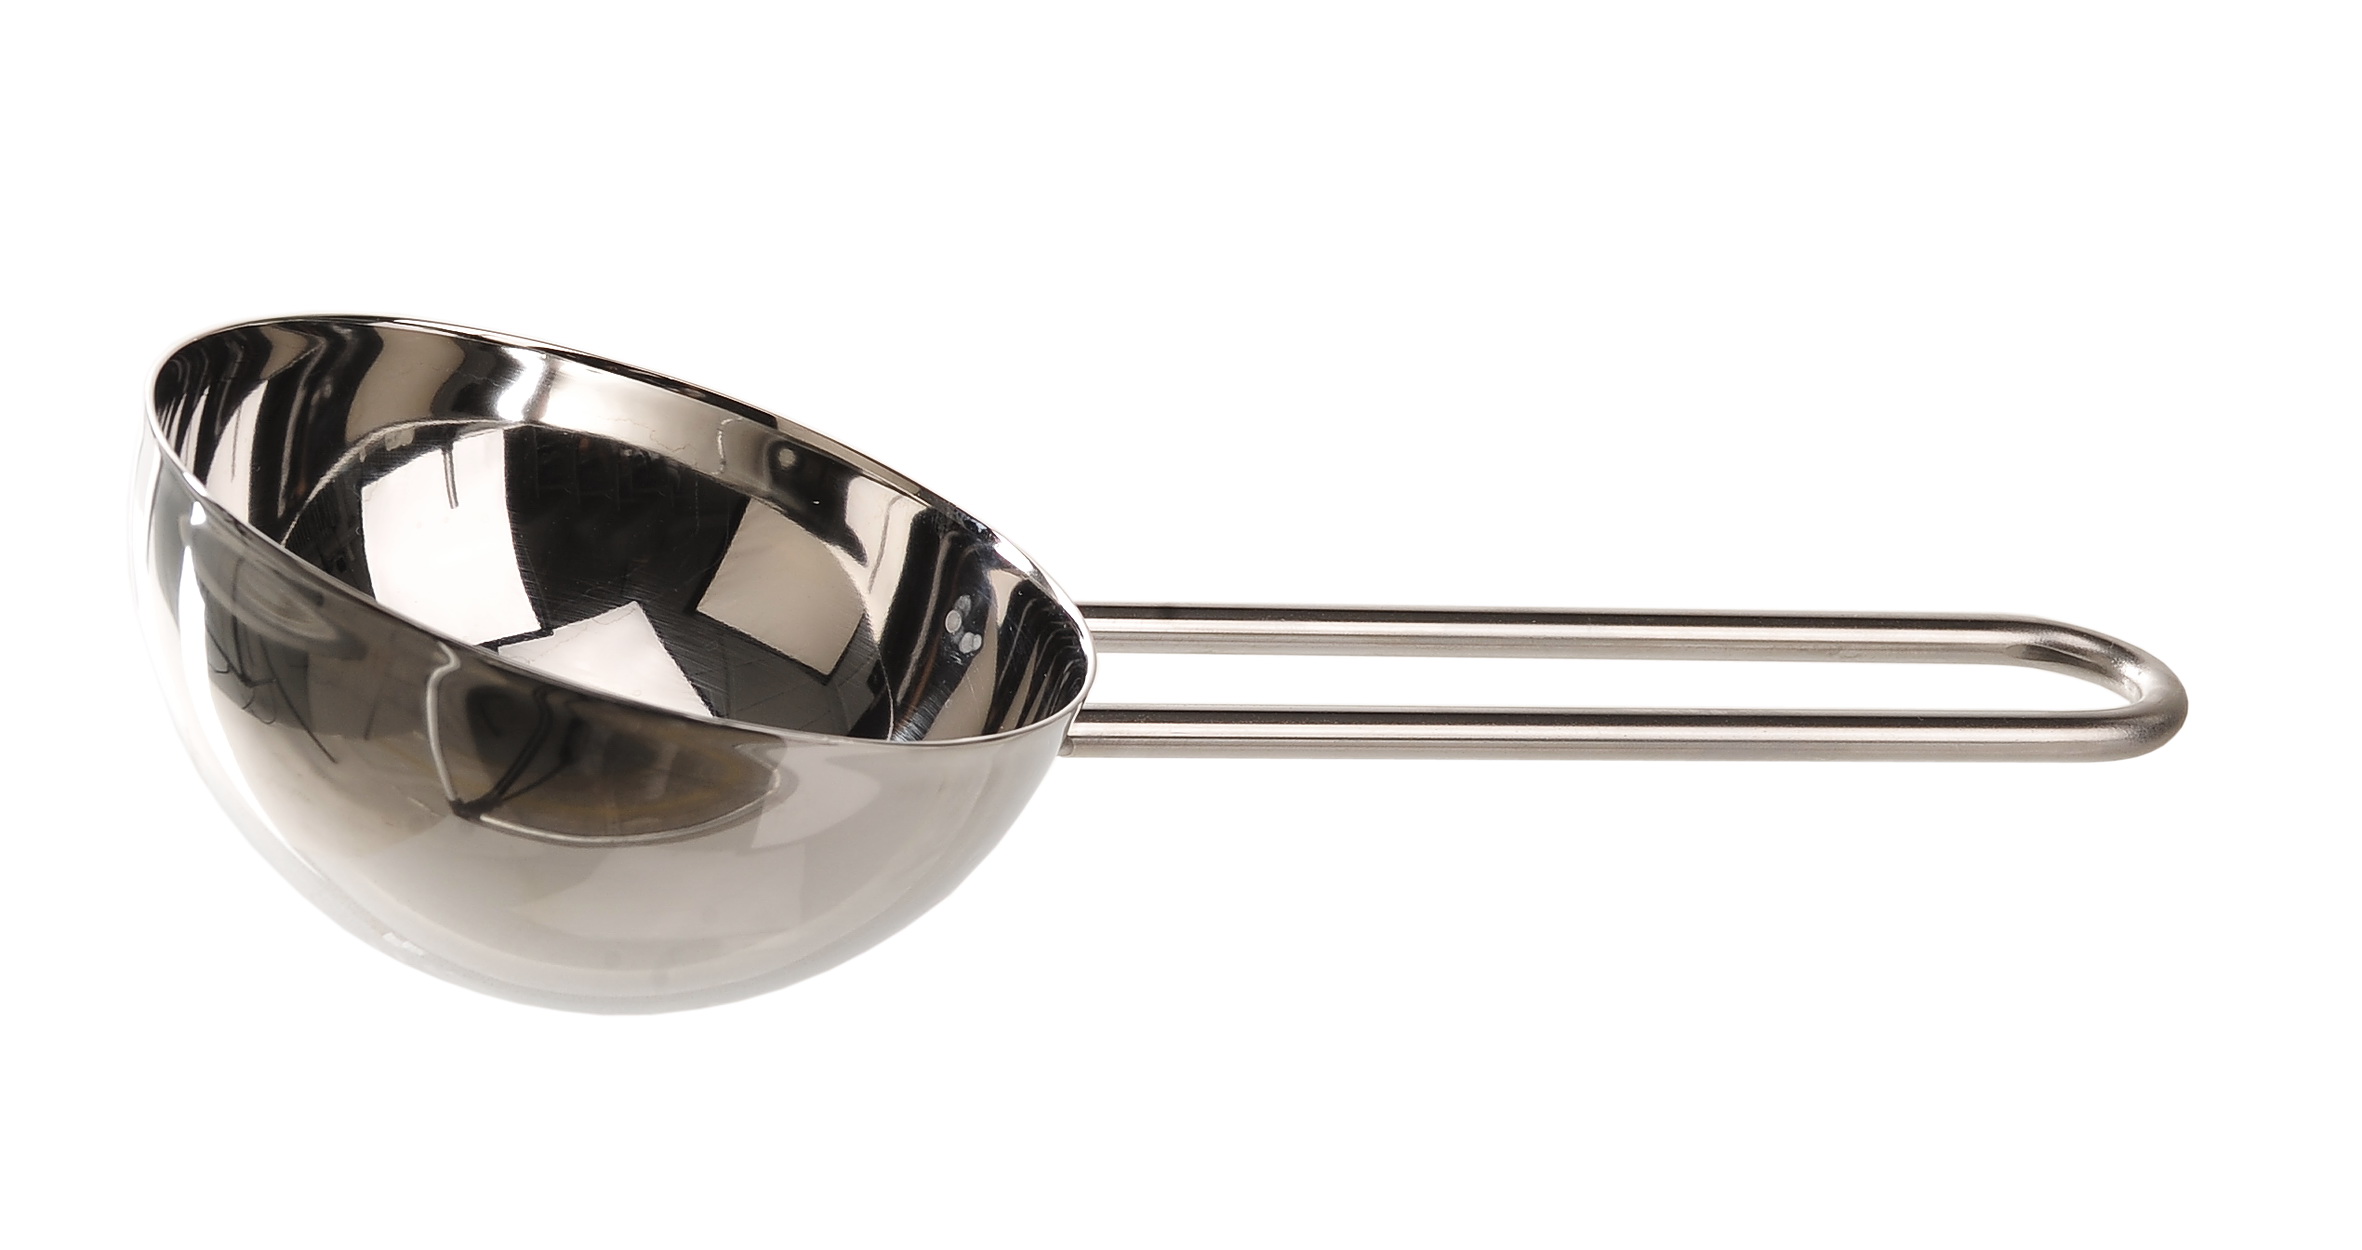 Portioning ladle, 18/10 stainless steel